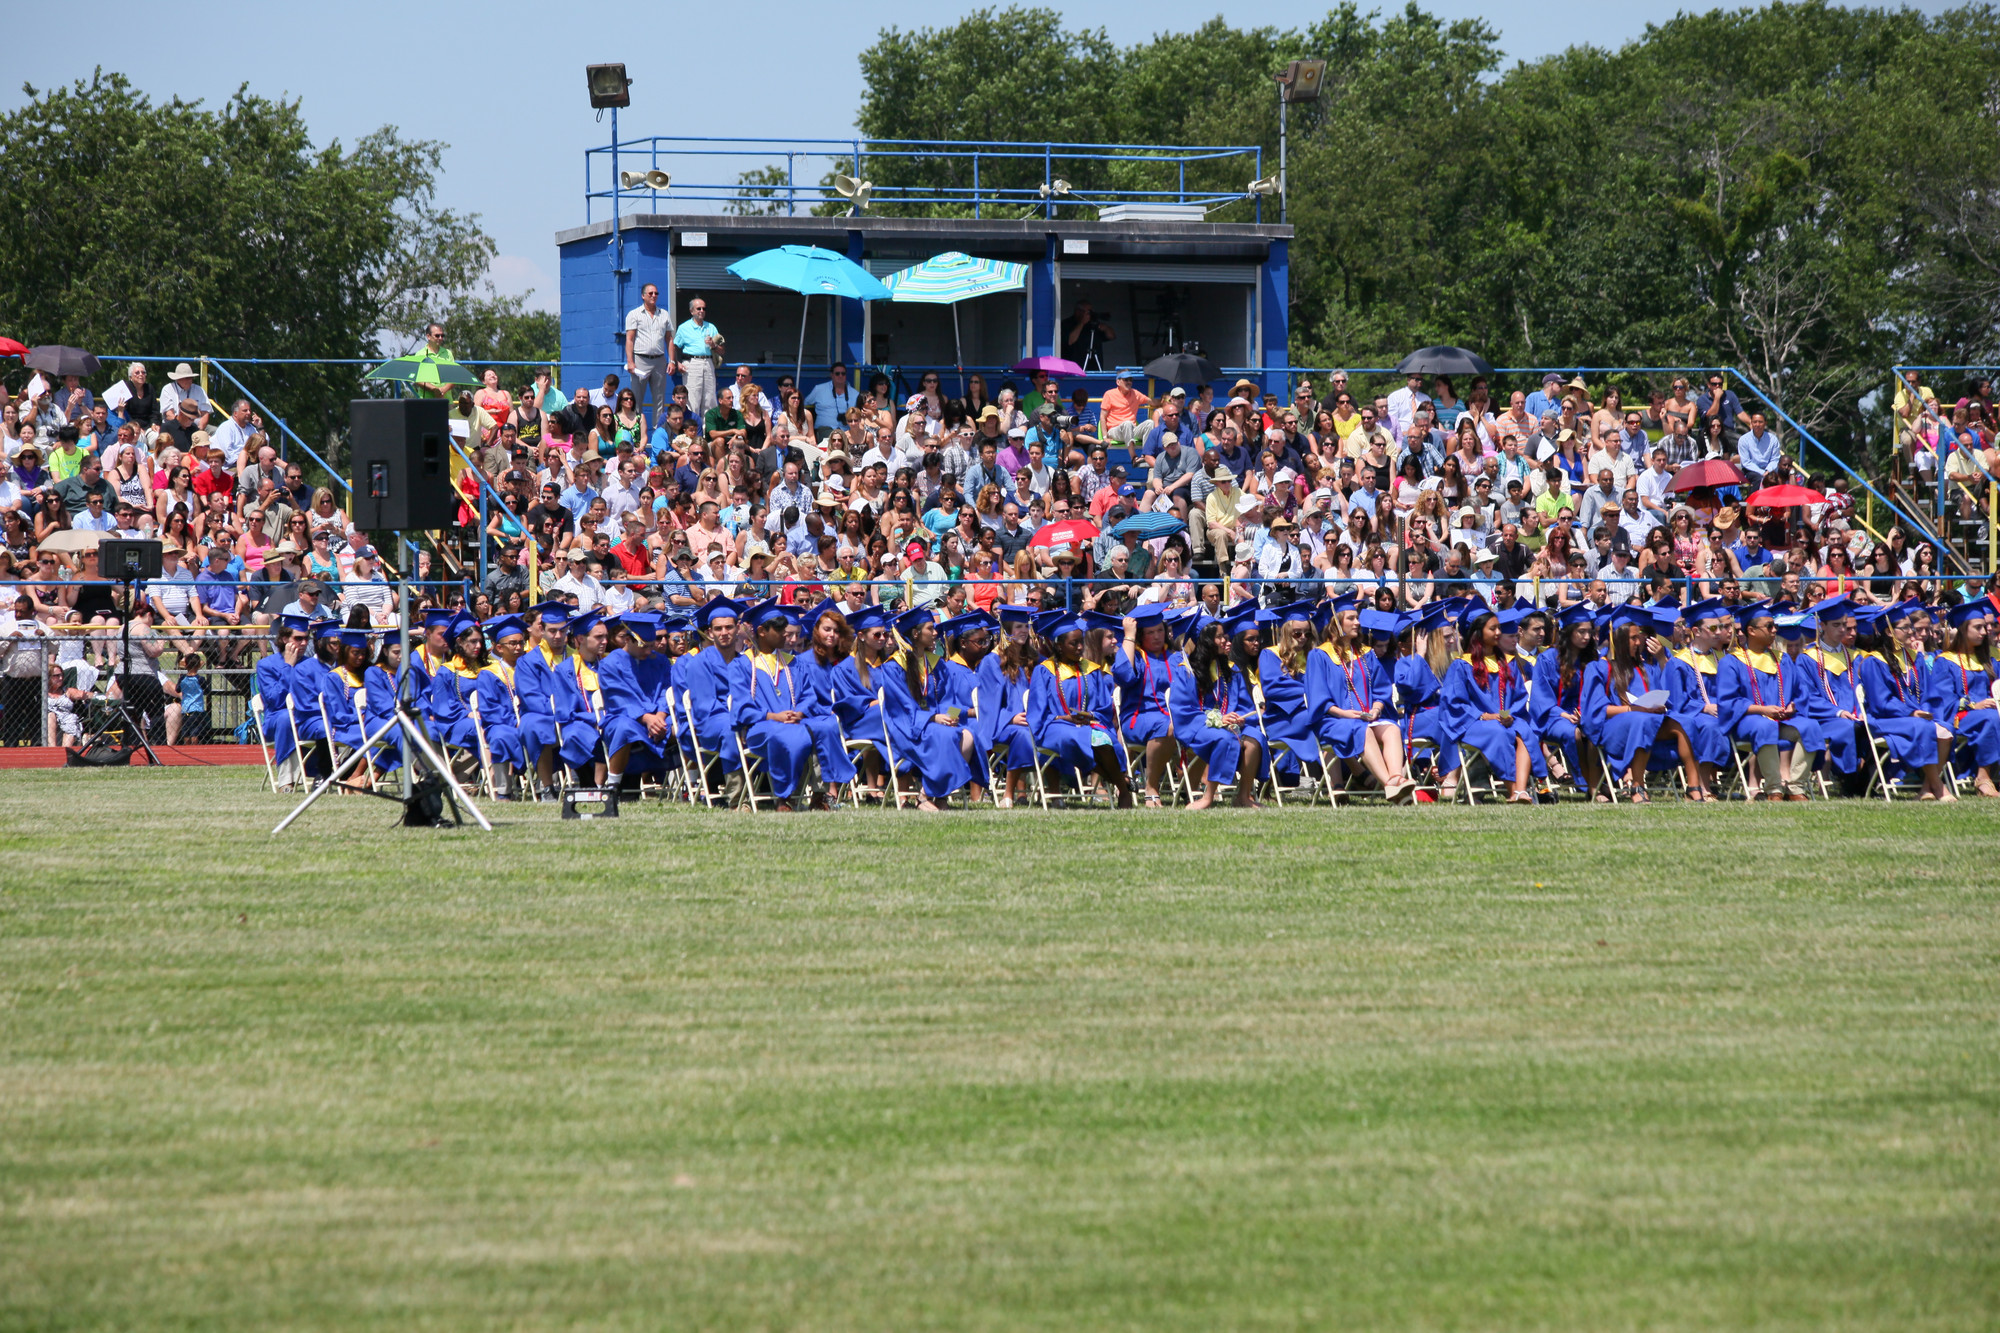 The East Meadow graduation took place on the John Barbour Memorial Field outside of the school.